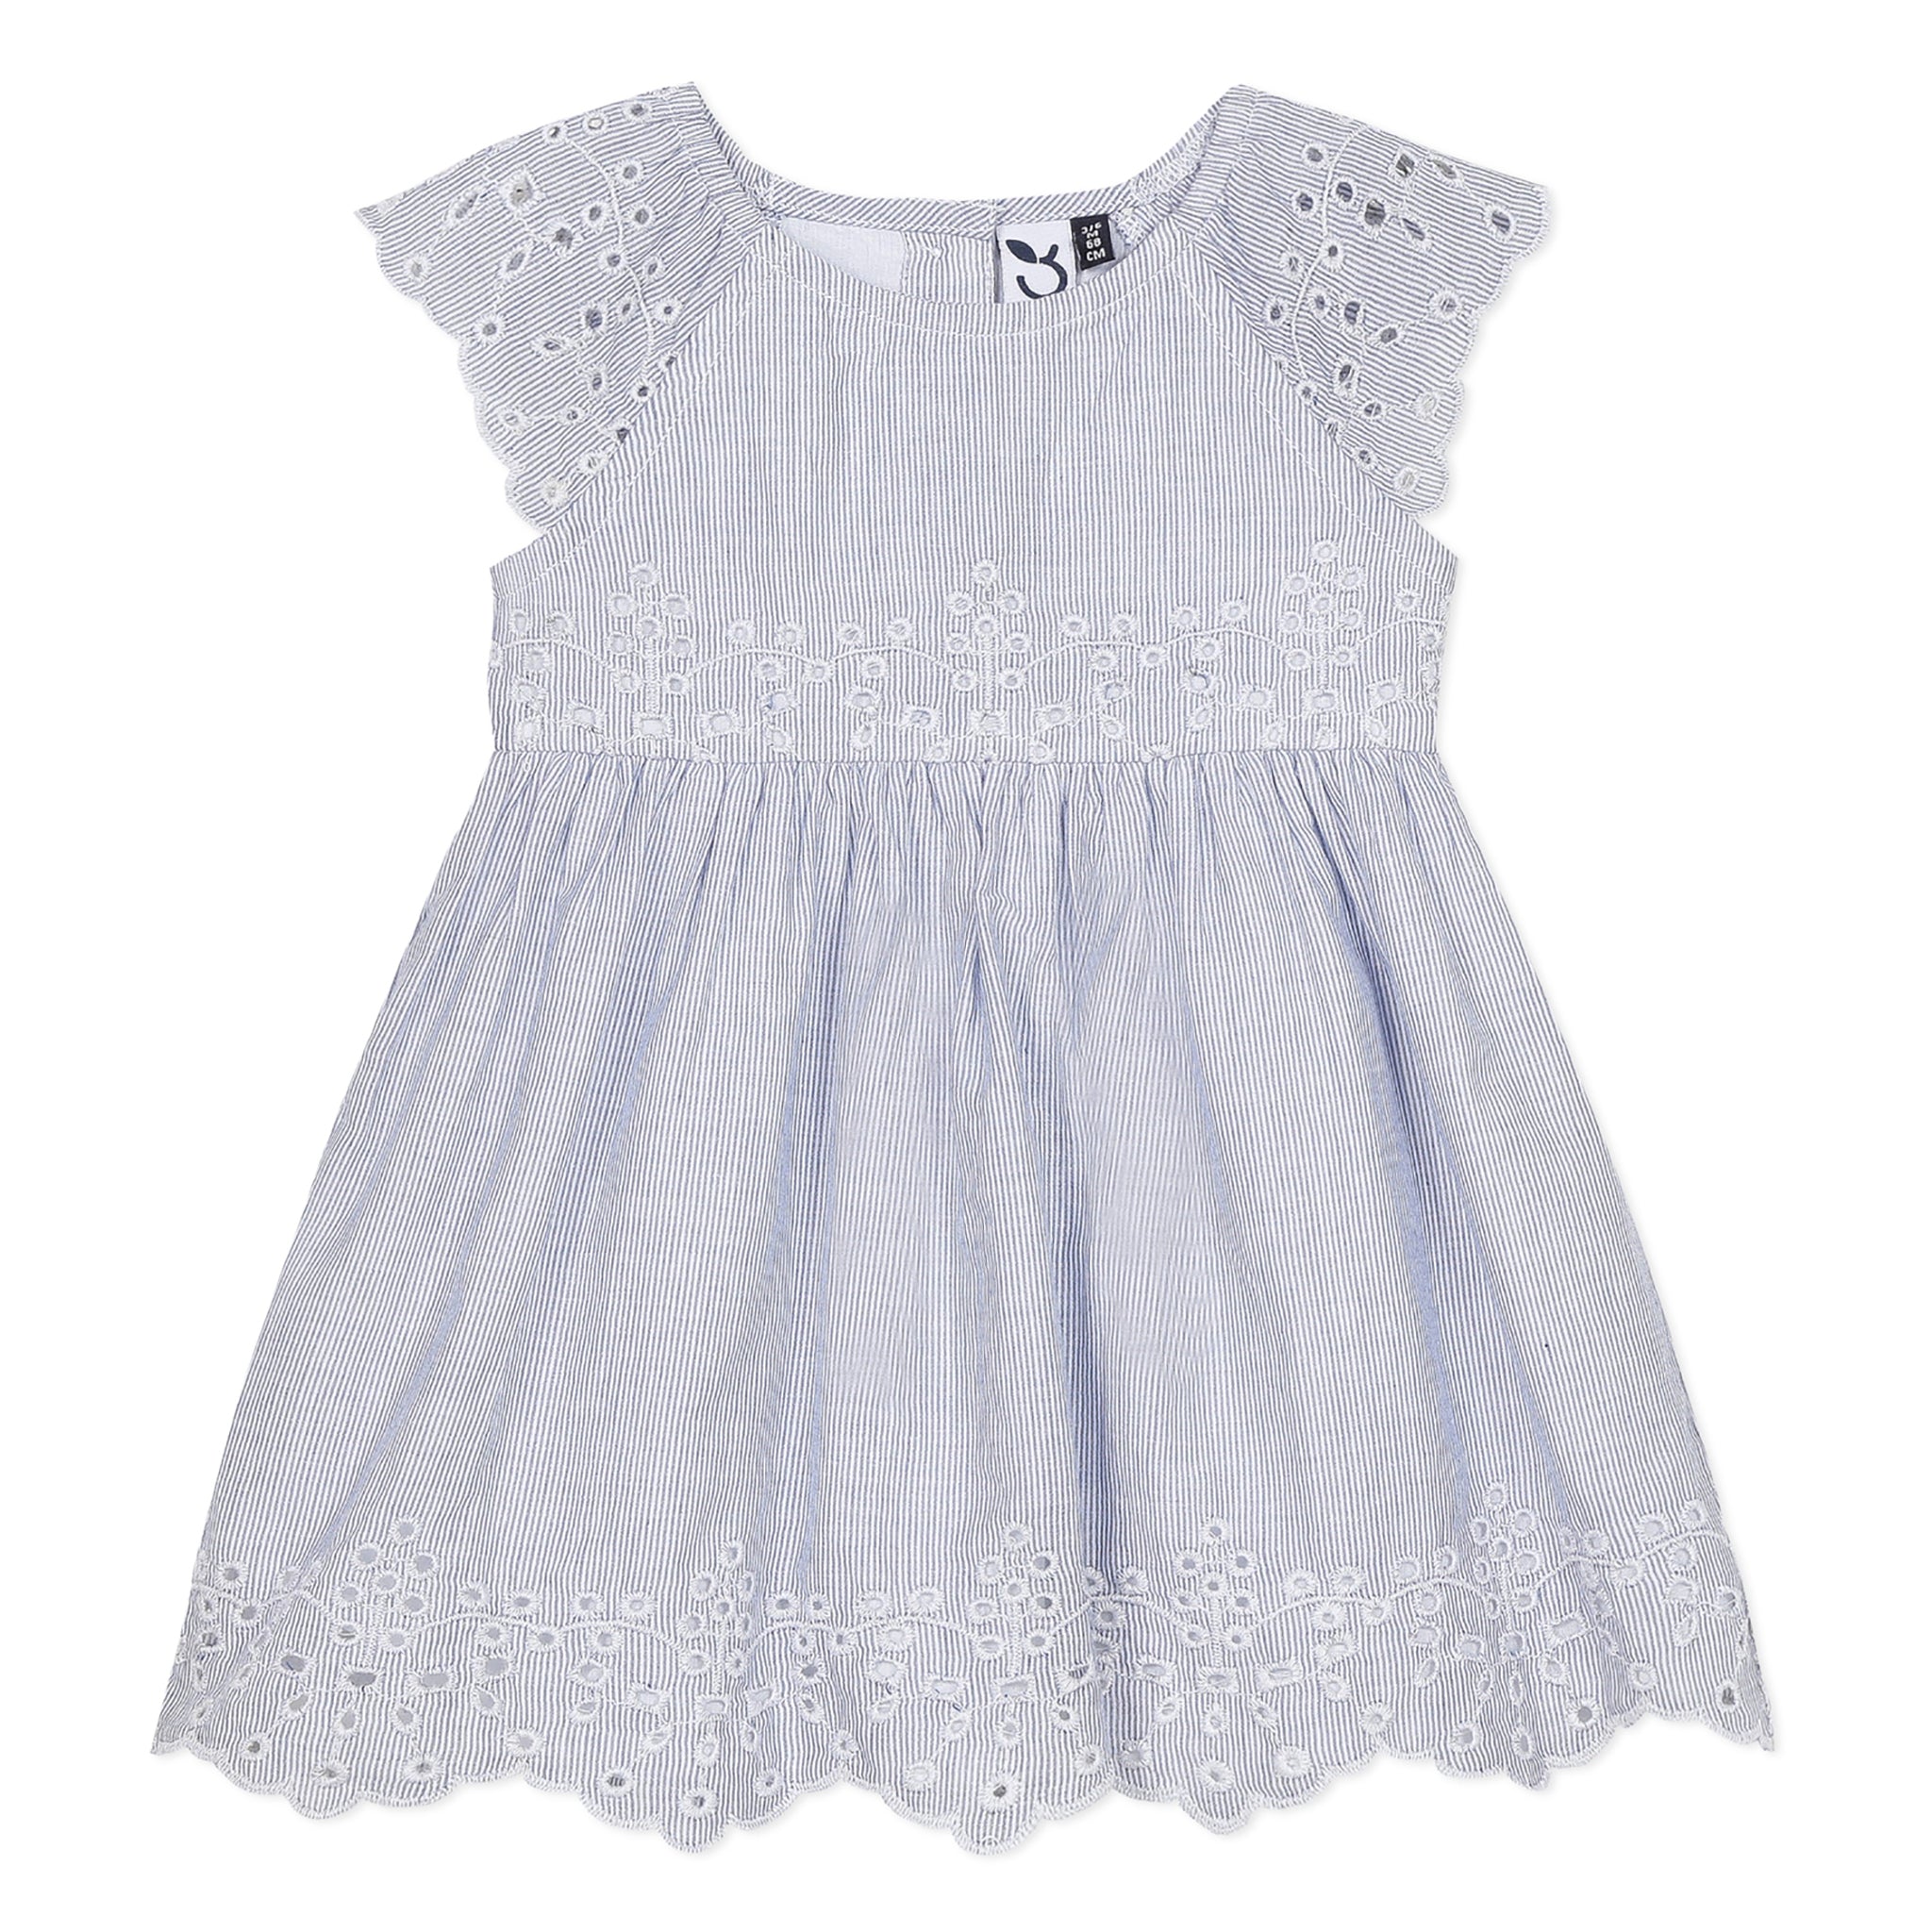 embroidered dress baby